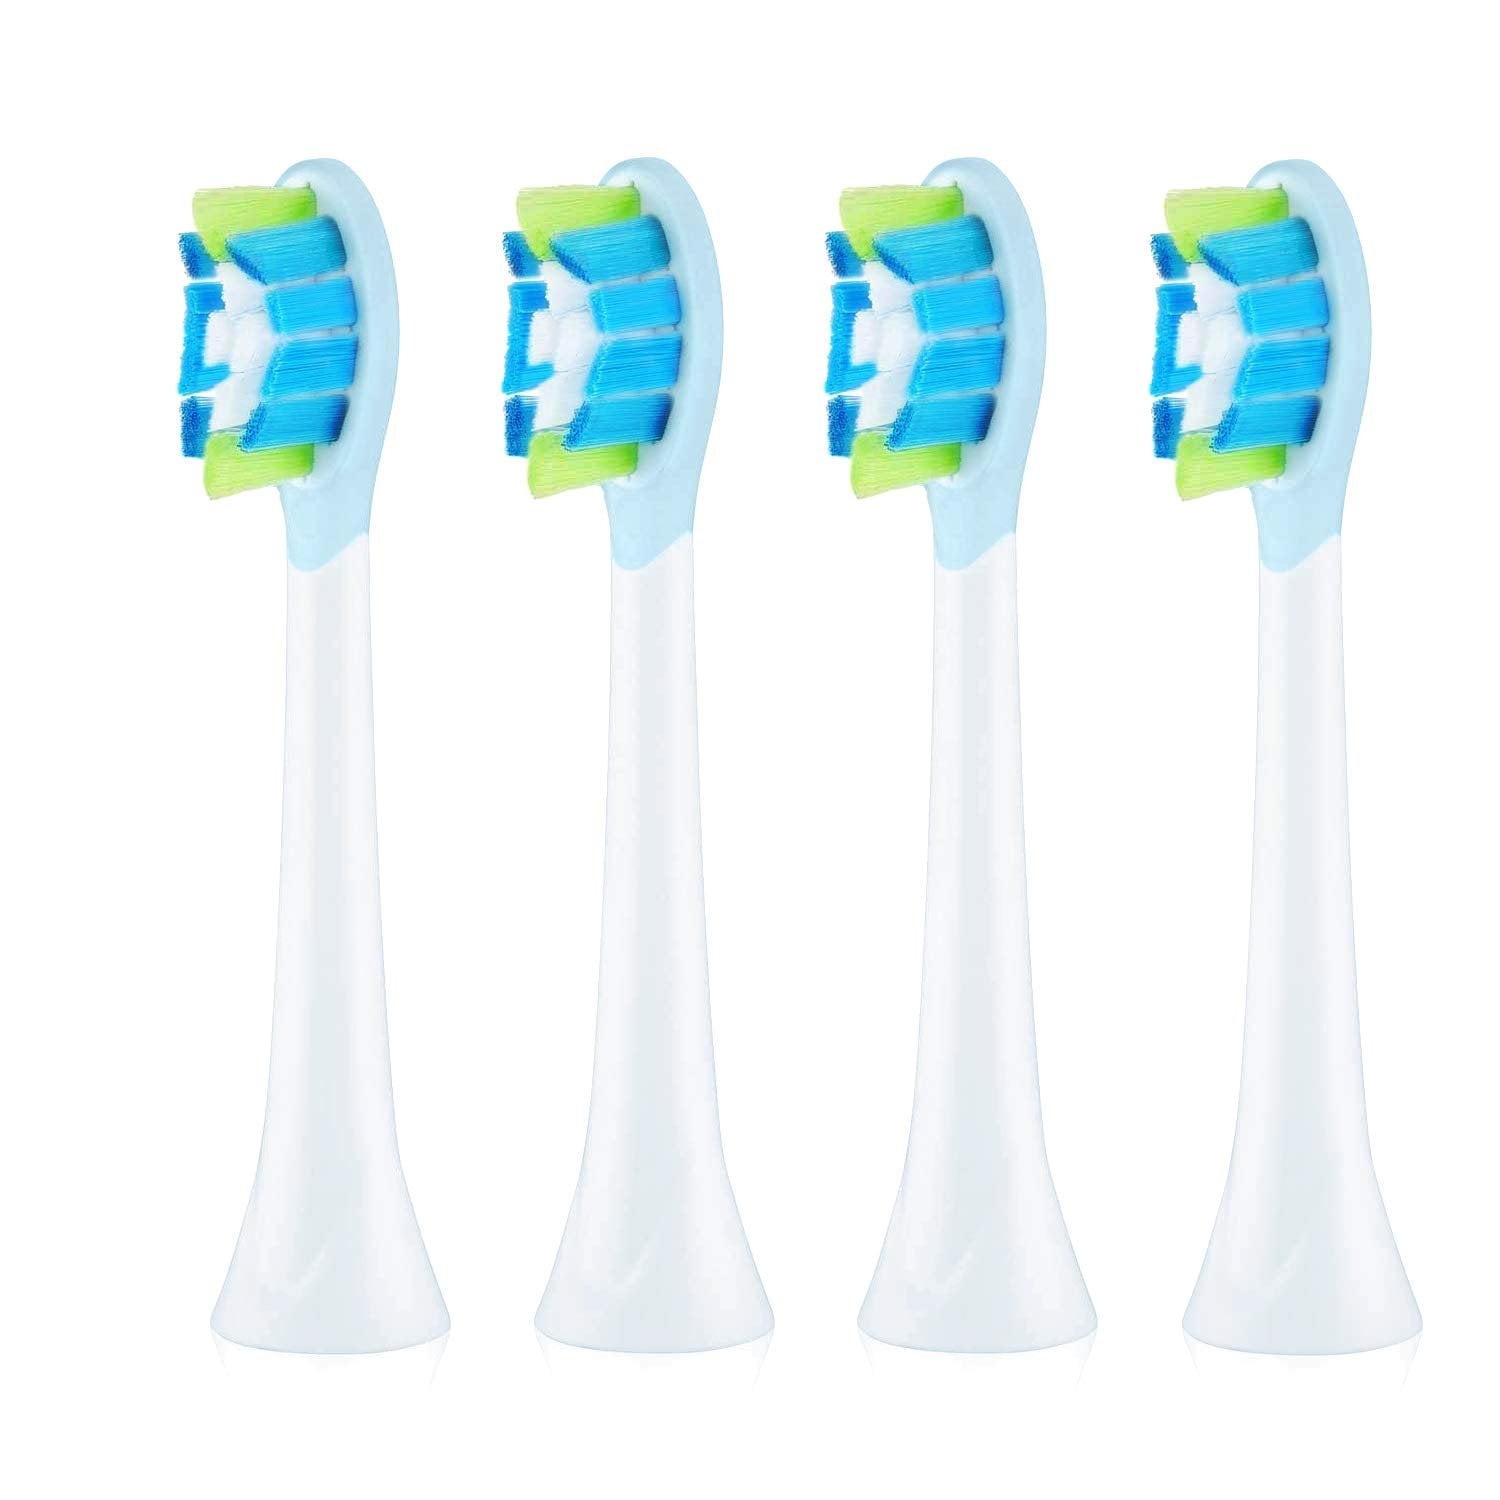 4Pcs Electric Toothbrush Head Cover Clear Protector for Philips Brush Hot Sale 